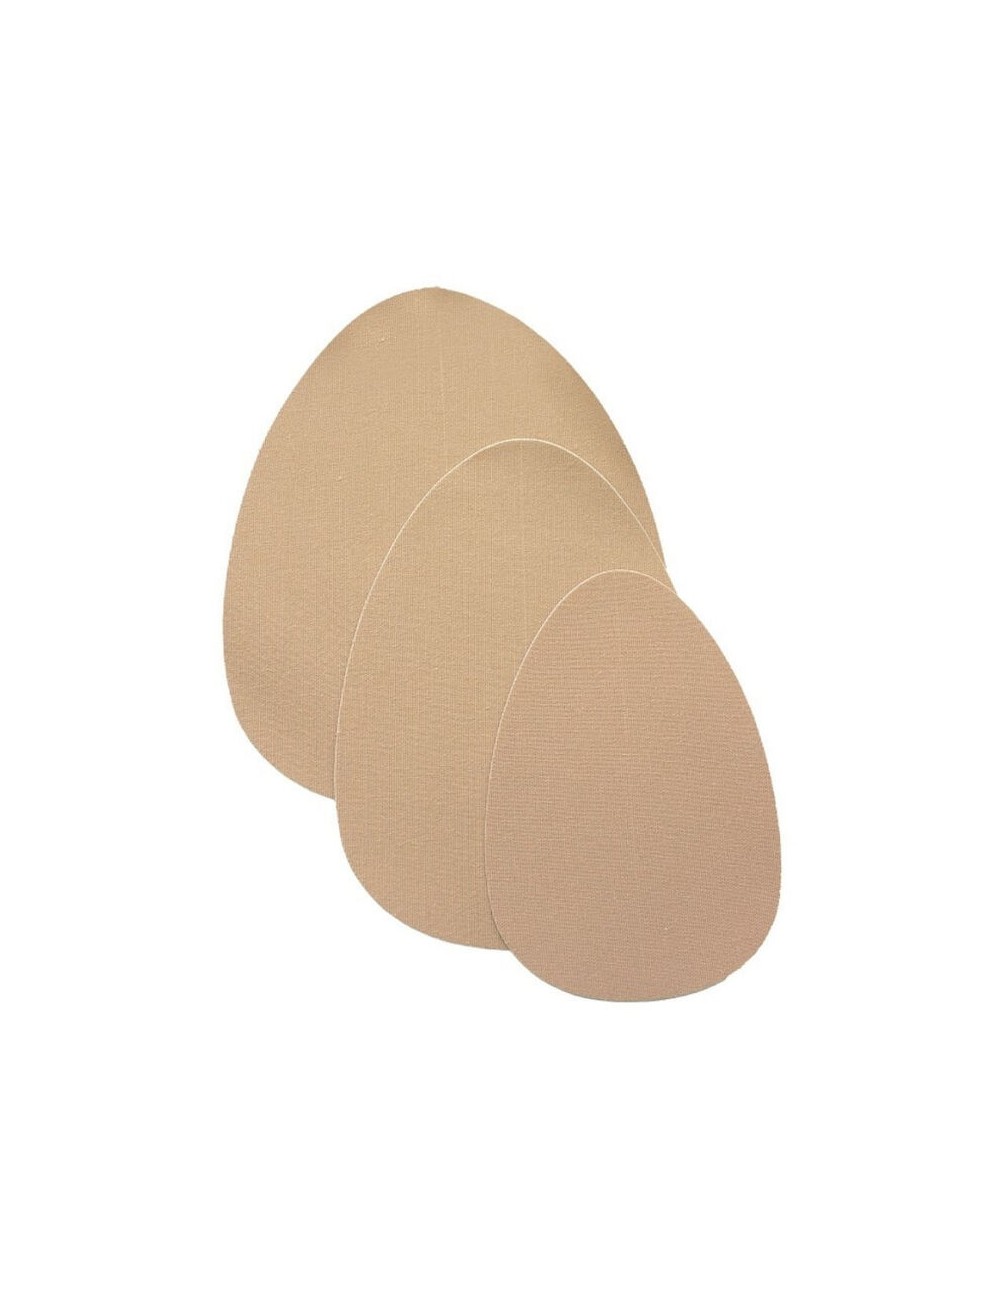 BYE BRA BREAST LIFT PADS + 3 PAIRS OF SATIN NIPPLE COVERS - BEIGE SIZE F-H